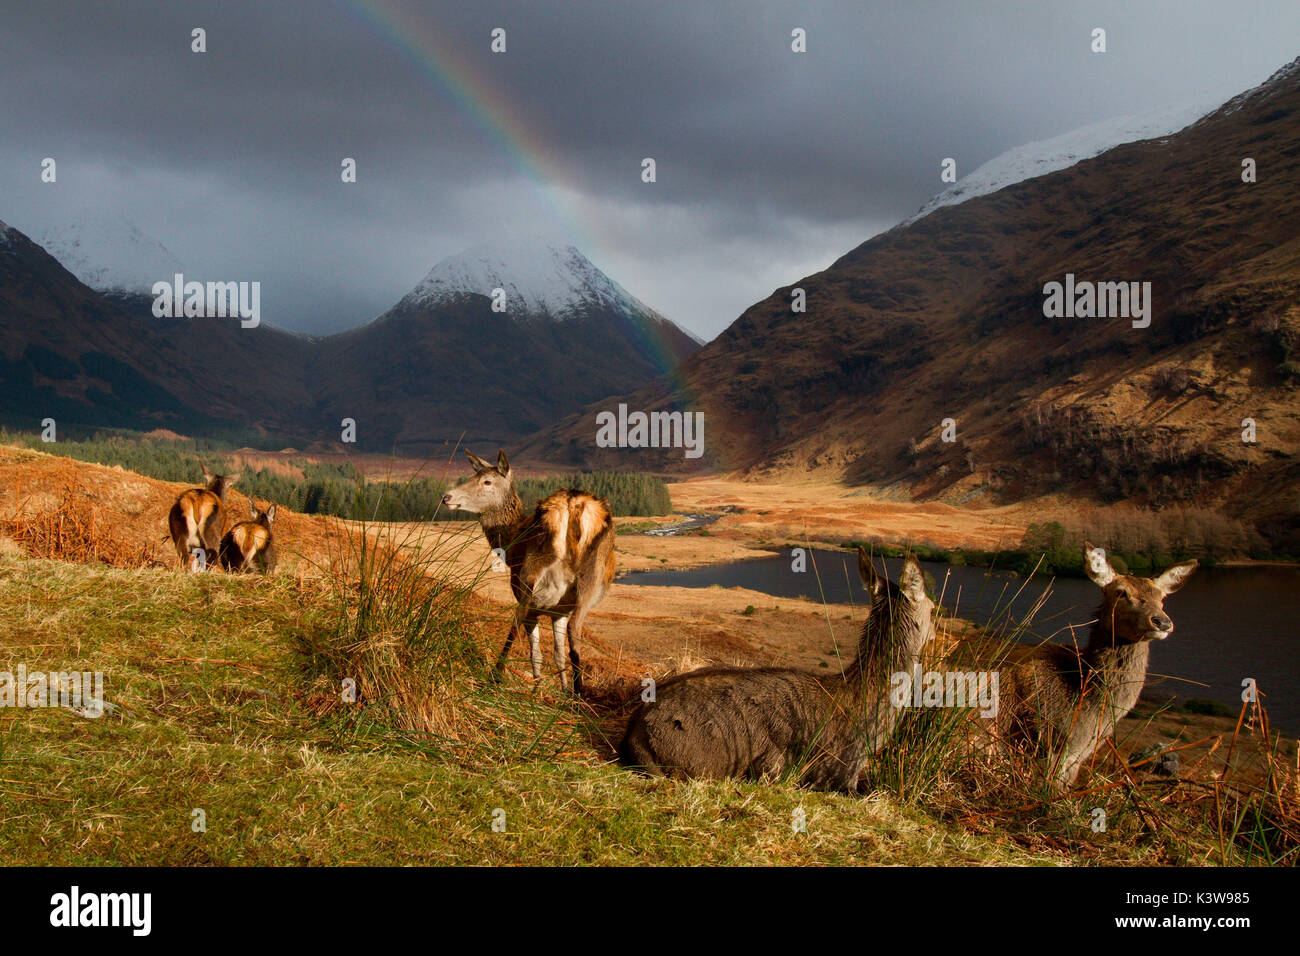 Glencoe, Scotland. Winter day in the Highlands, is lucky to be suddenly in front of a group of deer surrounded by snow-capped mountains and with a rainbow behind them Stock Photo